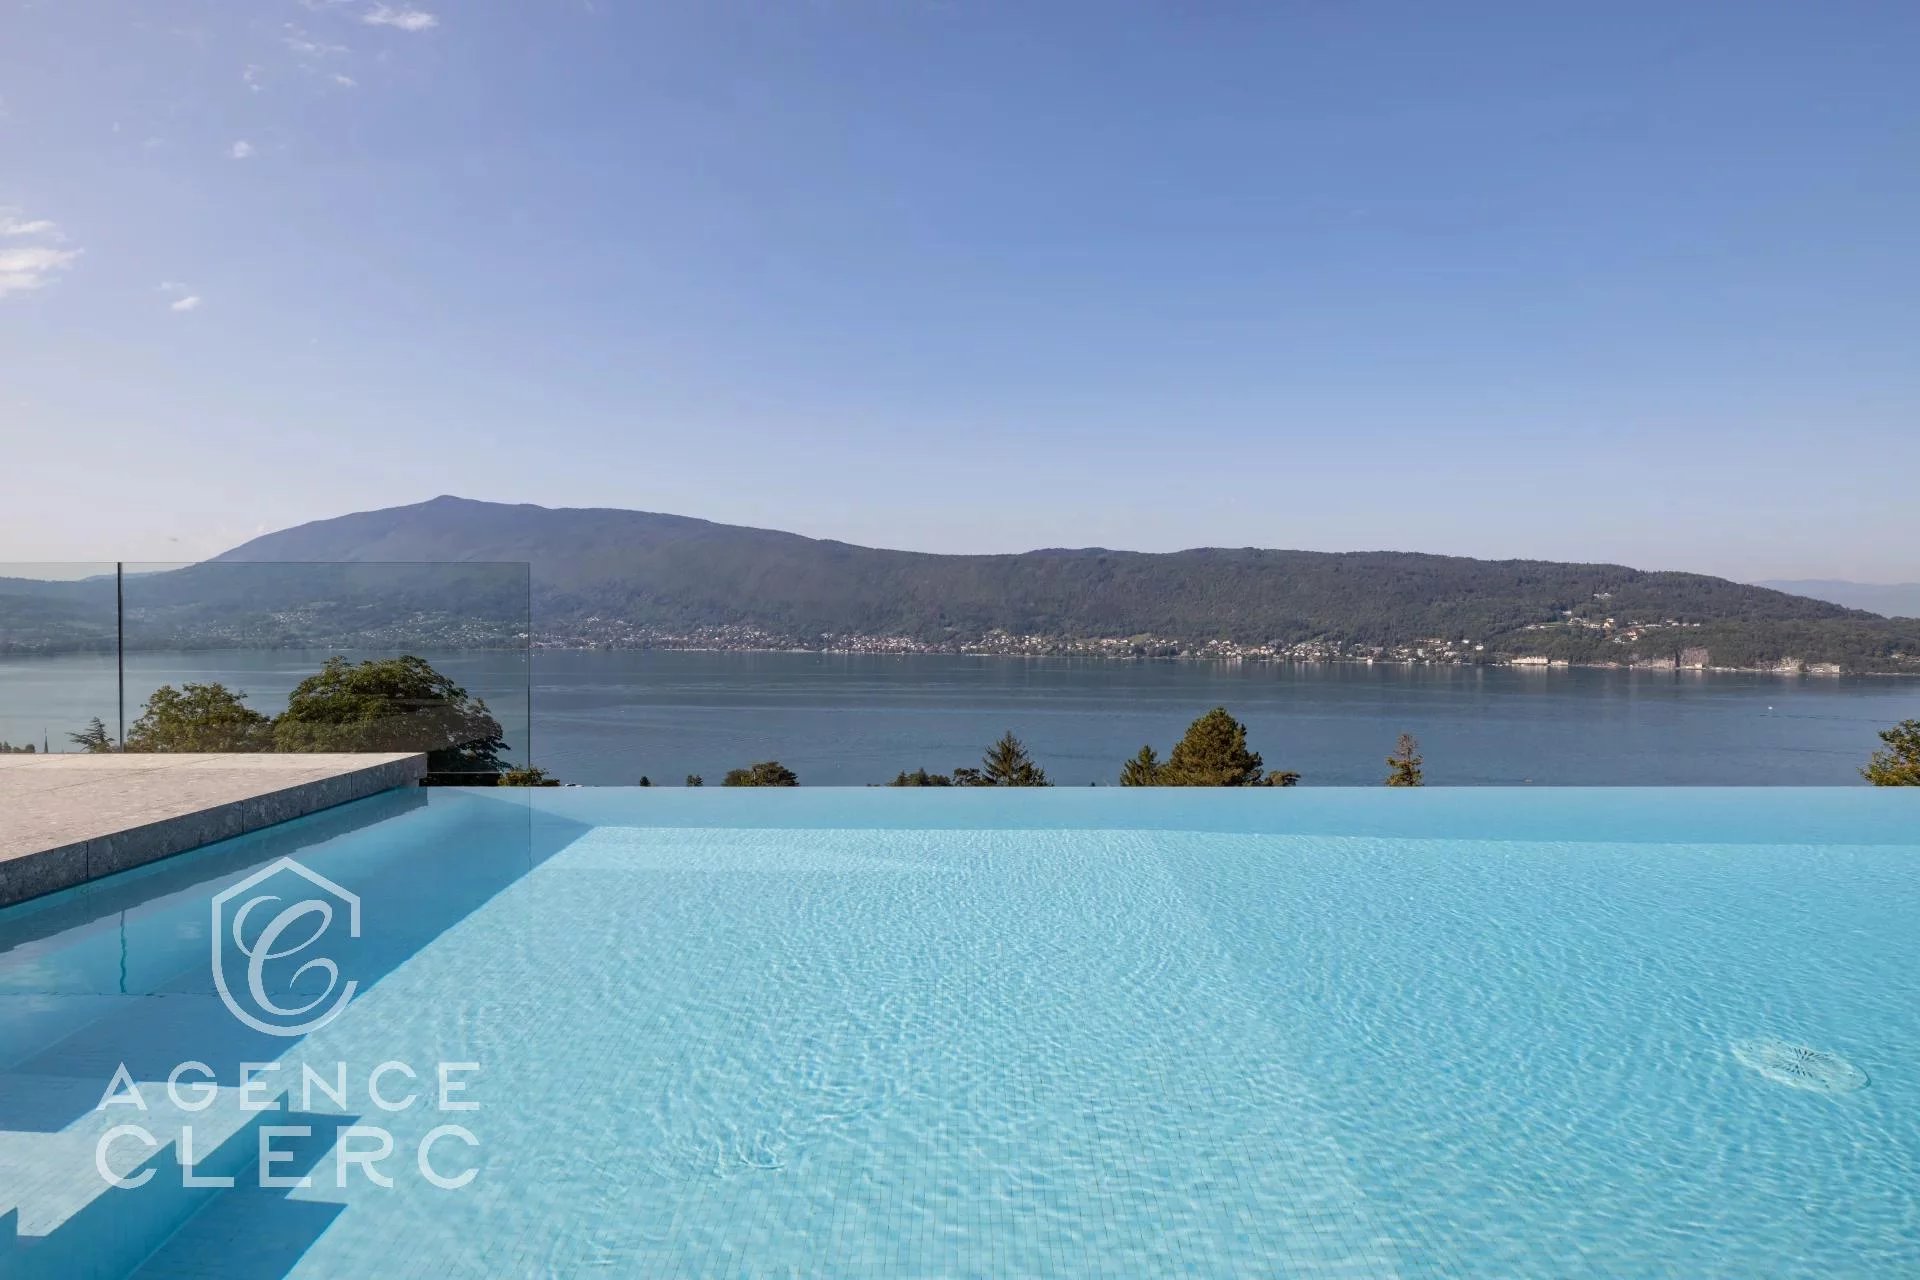 Veyrier du lac, property with panoramic view of the lake_3098